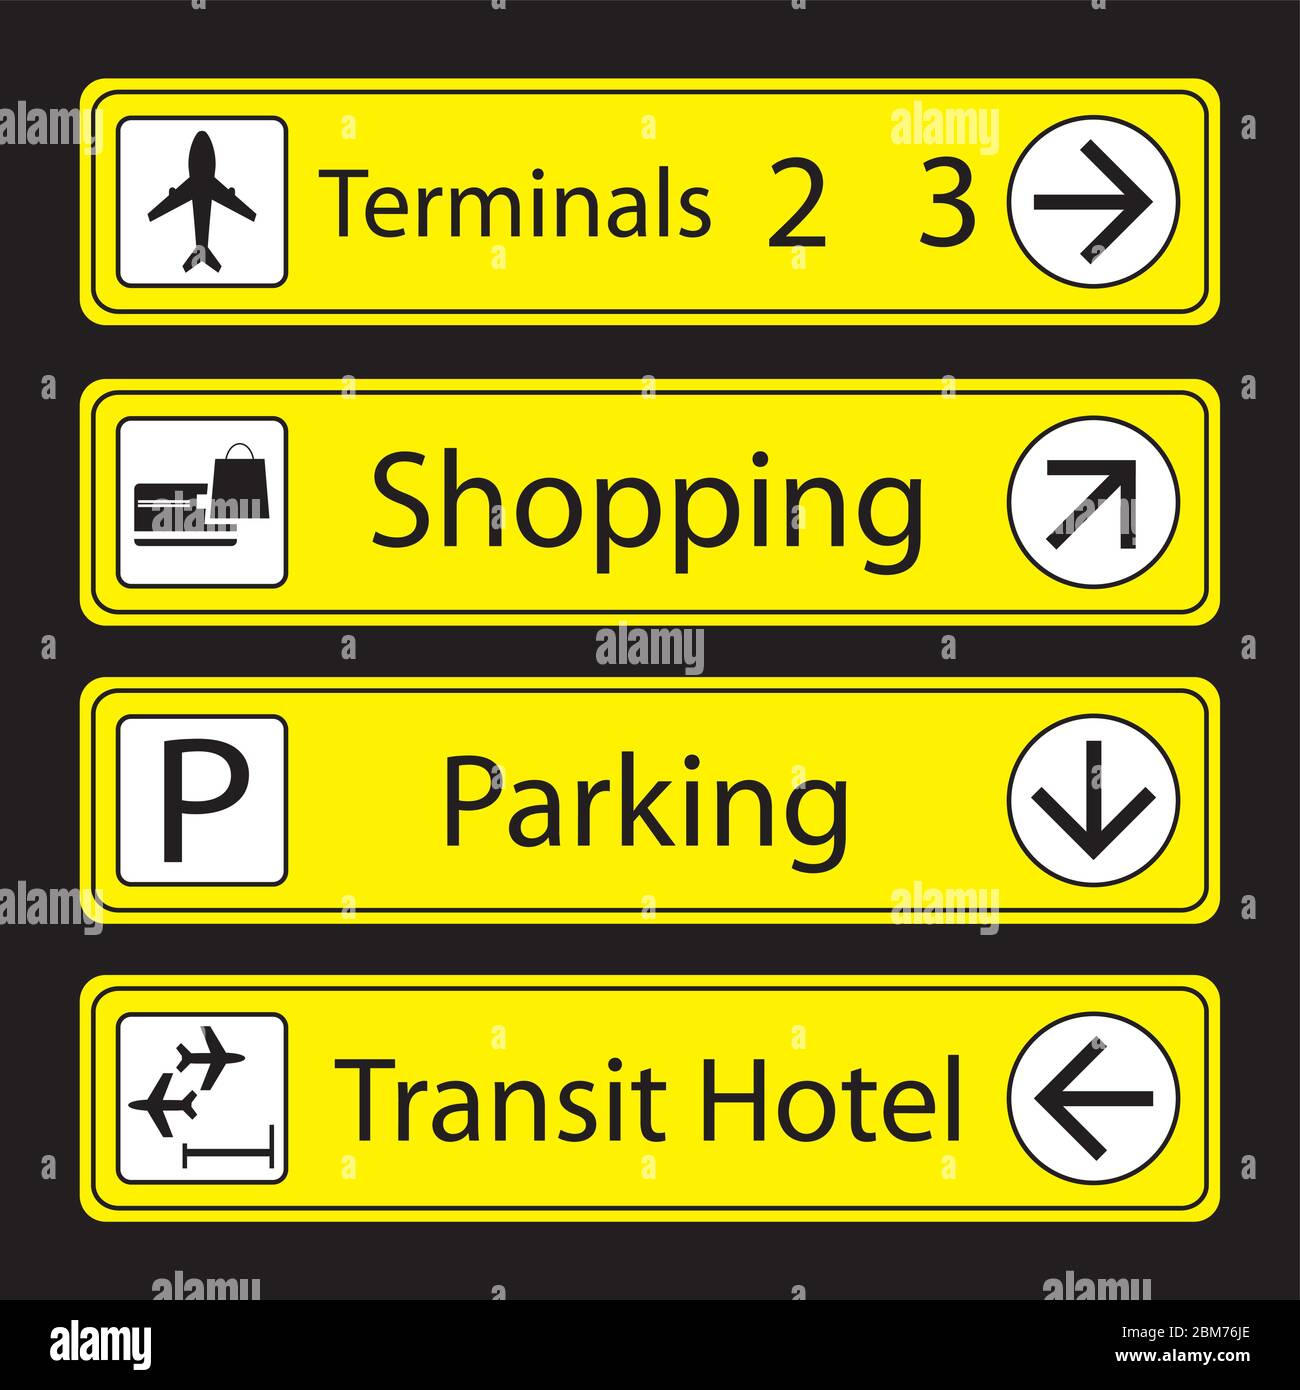 Set of Airport Signs with icons,monochromatic pictograms on yellow banners,vector illustration. Stock Vector